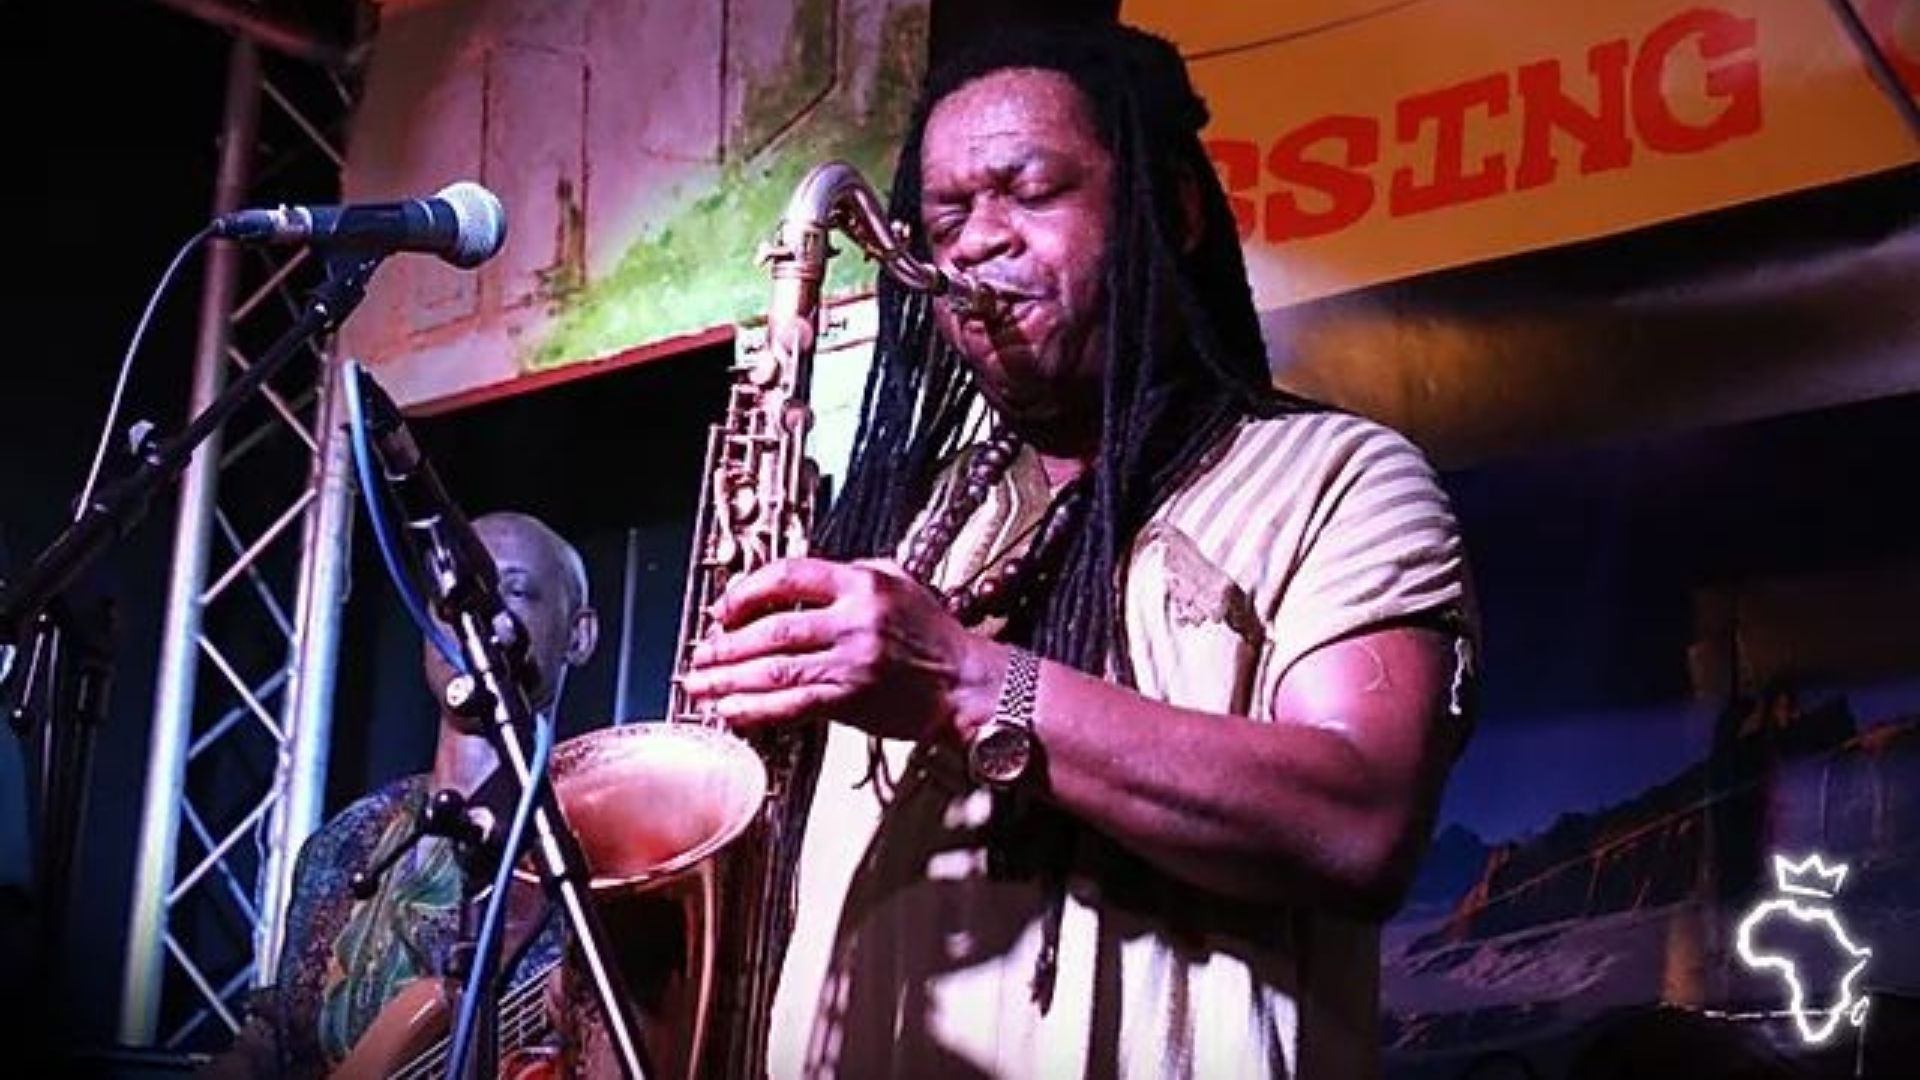 Bukky Leo is a renowned UK jazz, afrobeat musician. He is known for his exceptional skills as a tenor saxophonist and lead vocalist